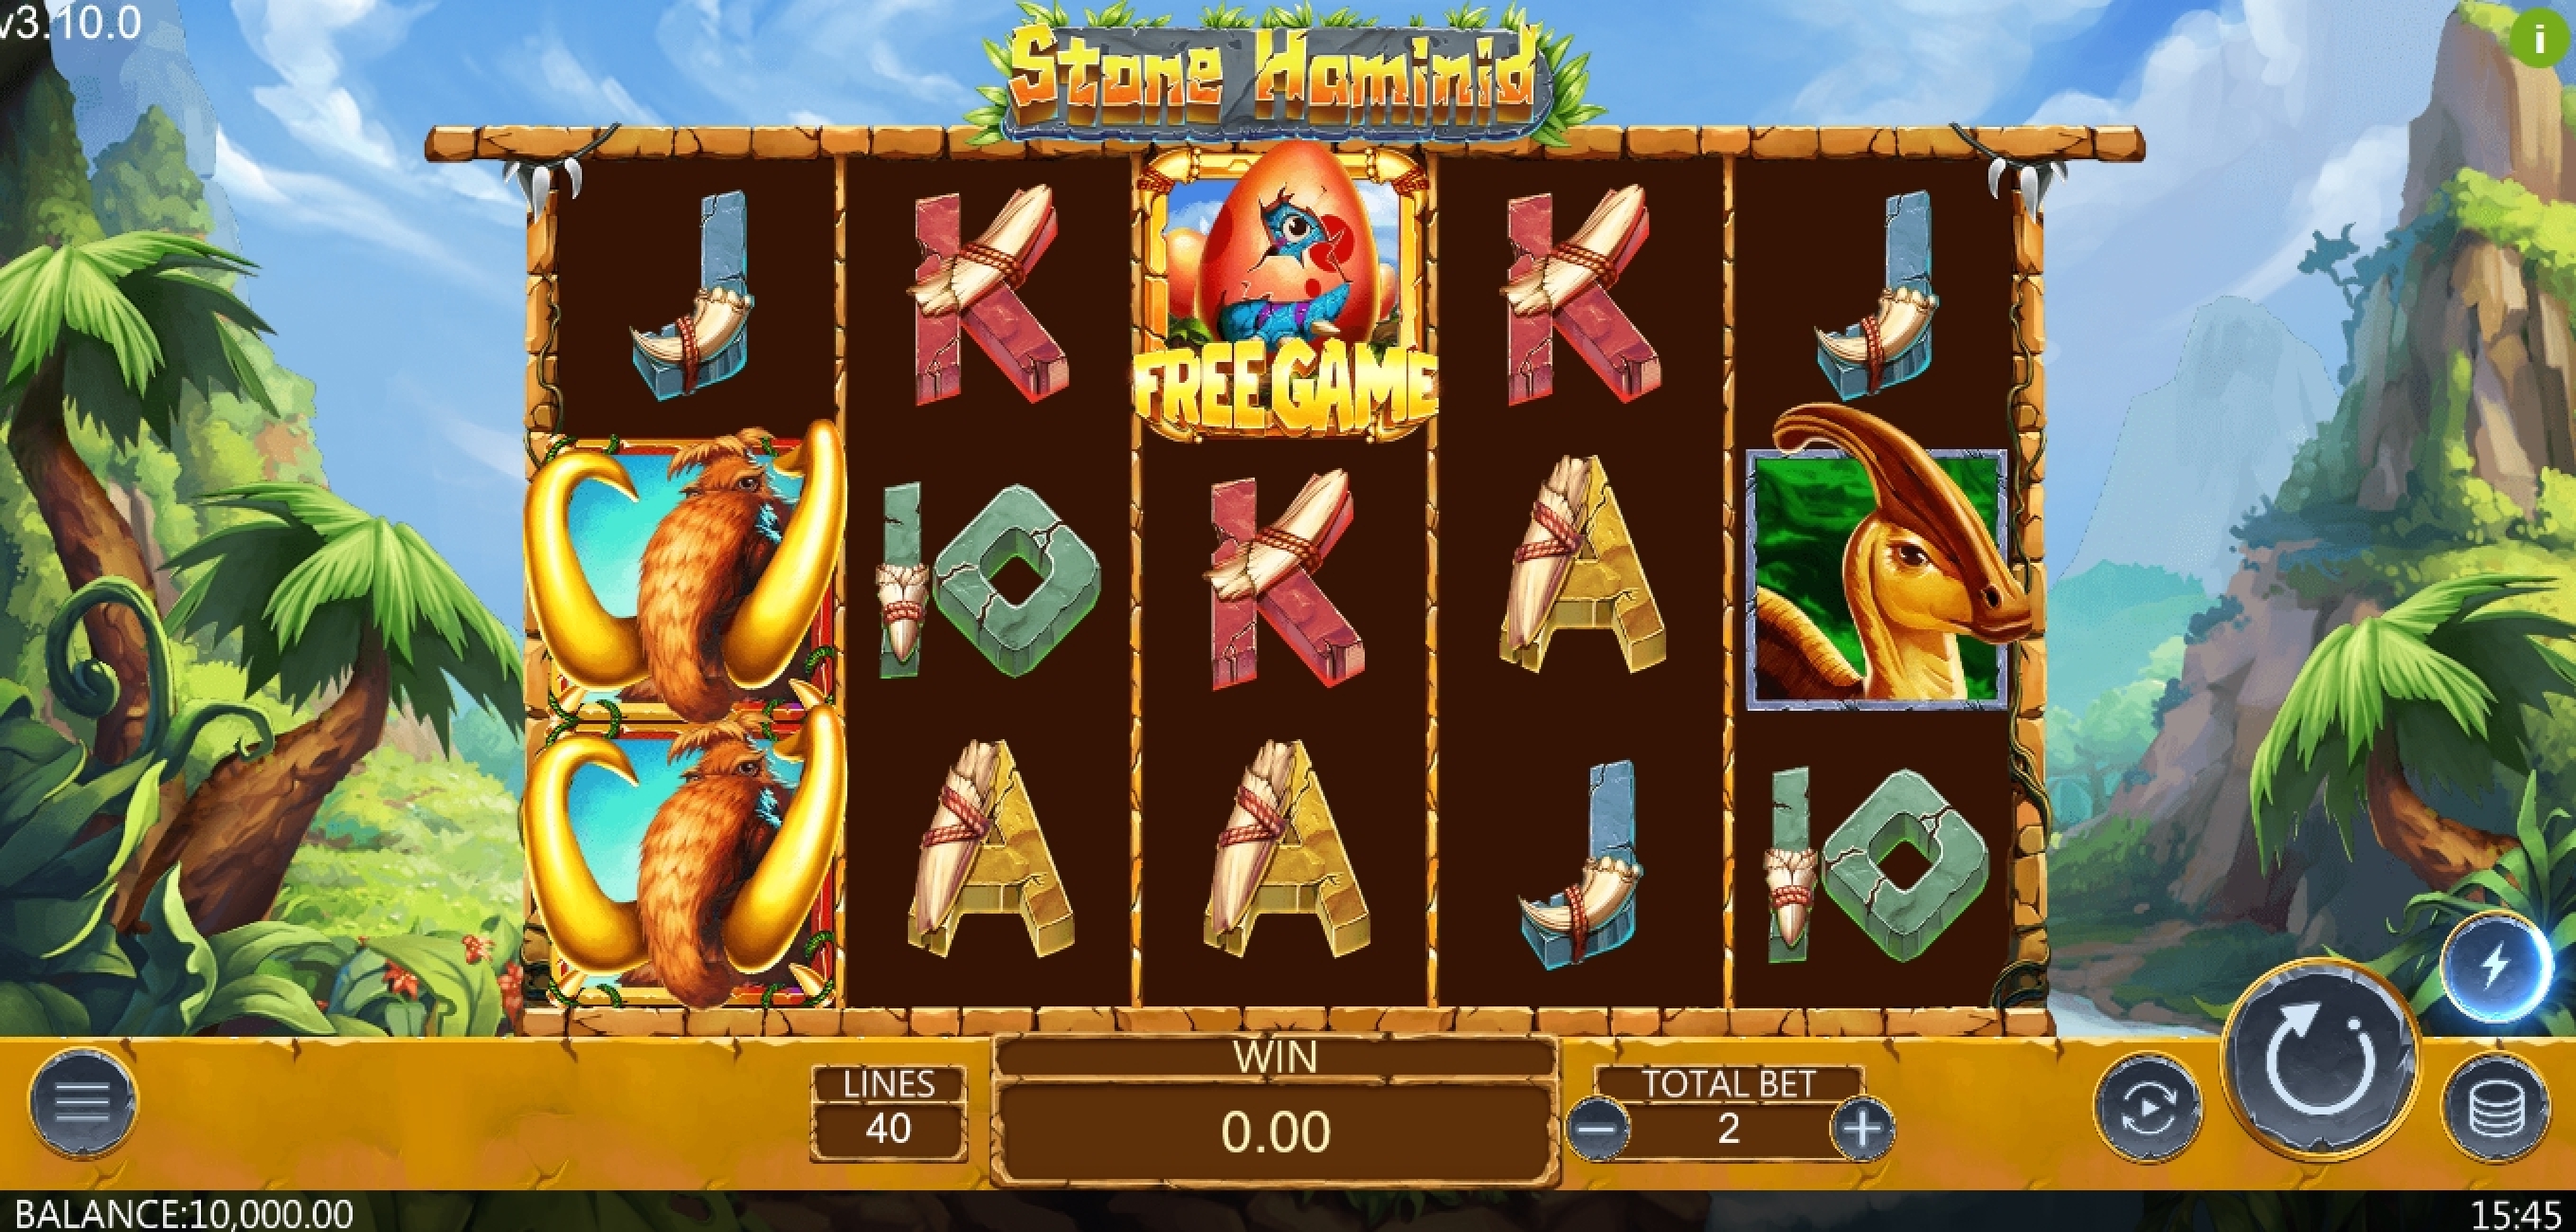 Reels in Stone Hominid Slot Game by Dragoon Soft